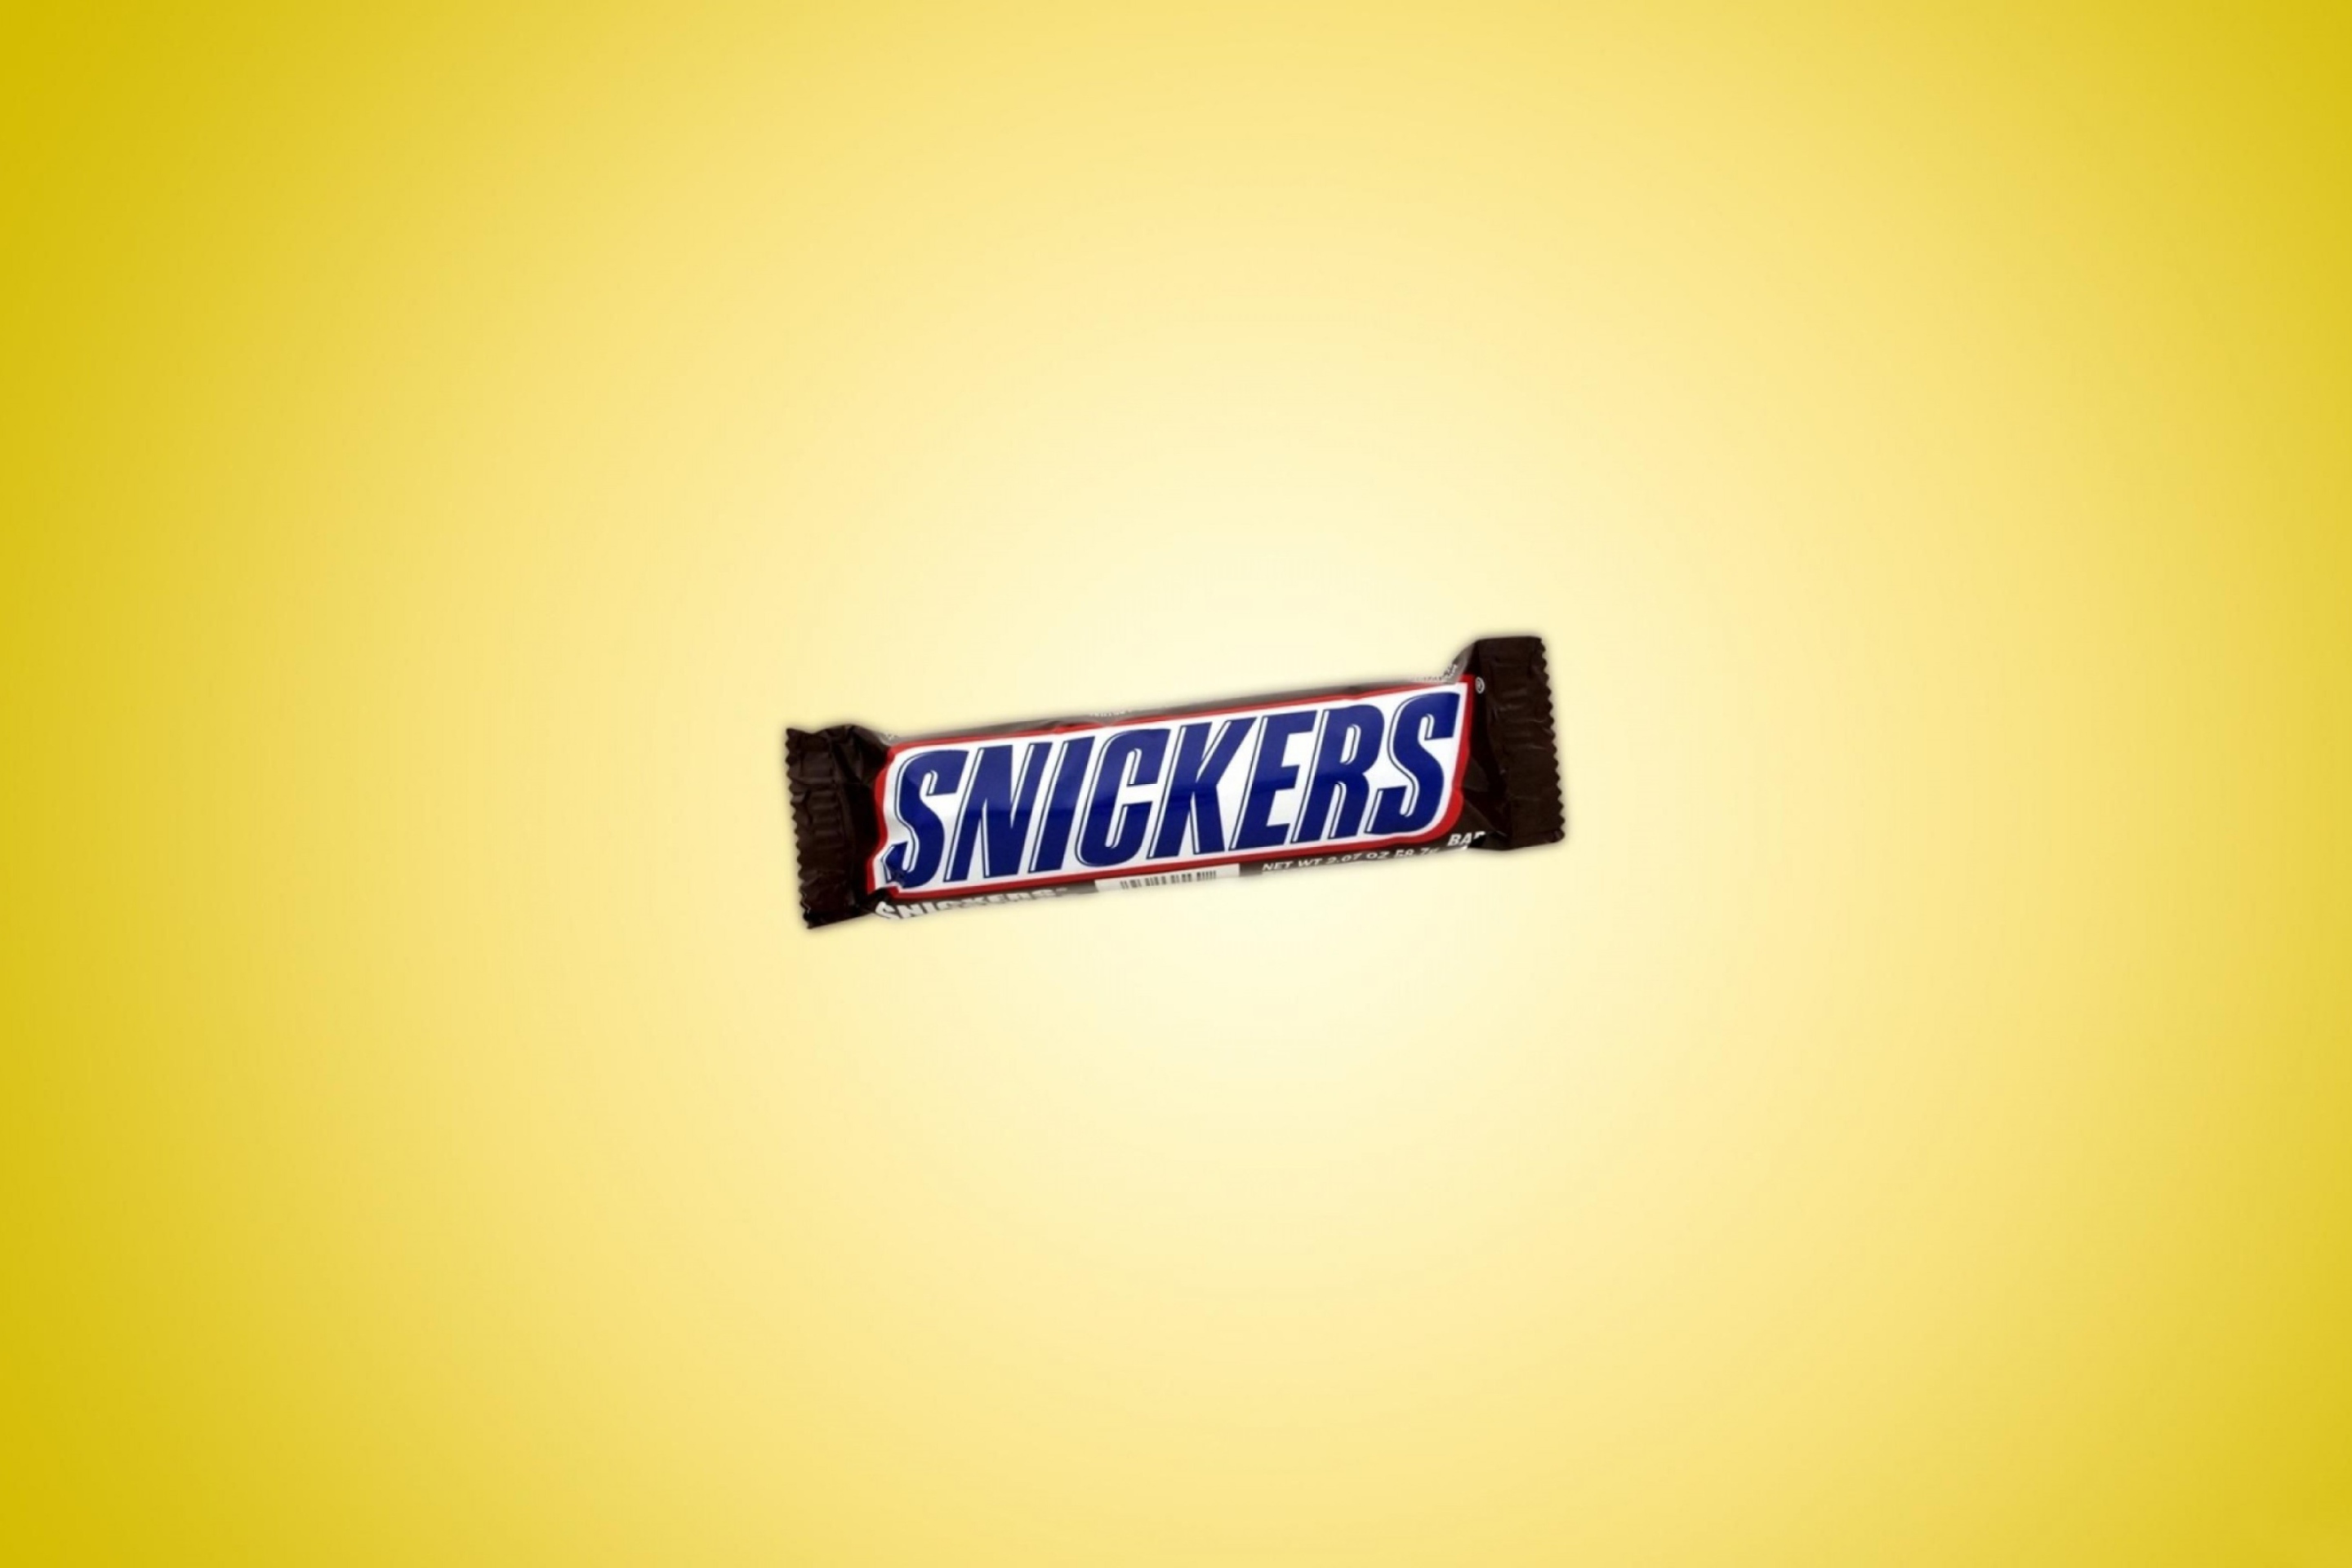 Snickers Chocolate wallpaper 2880x1920